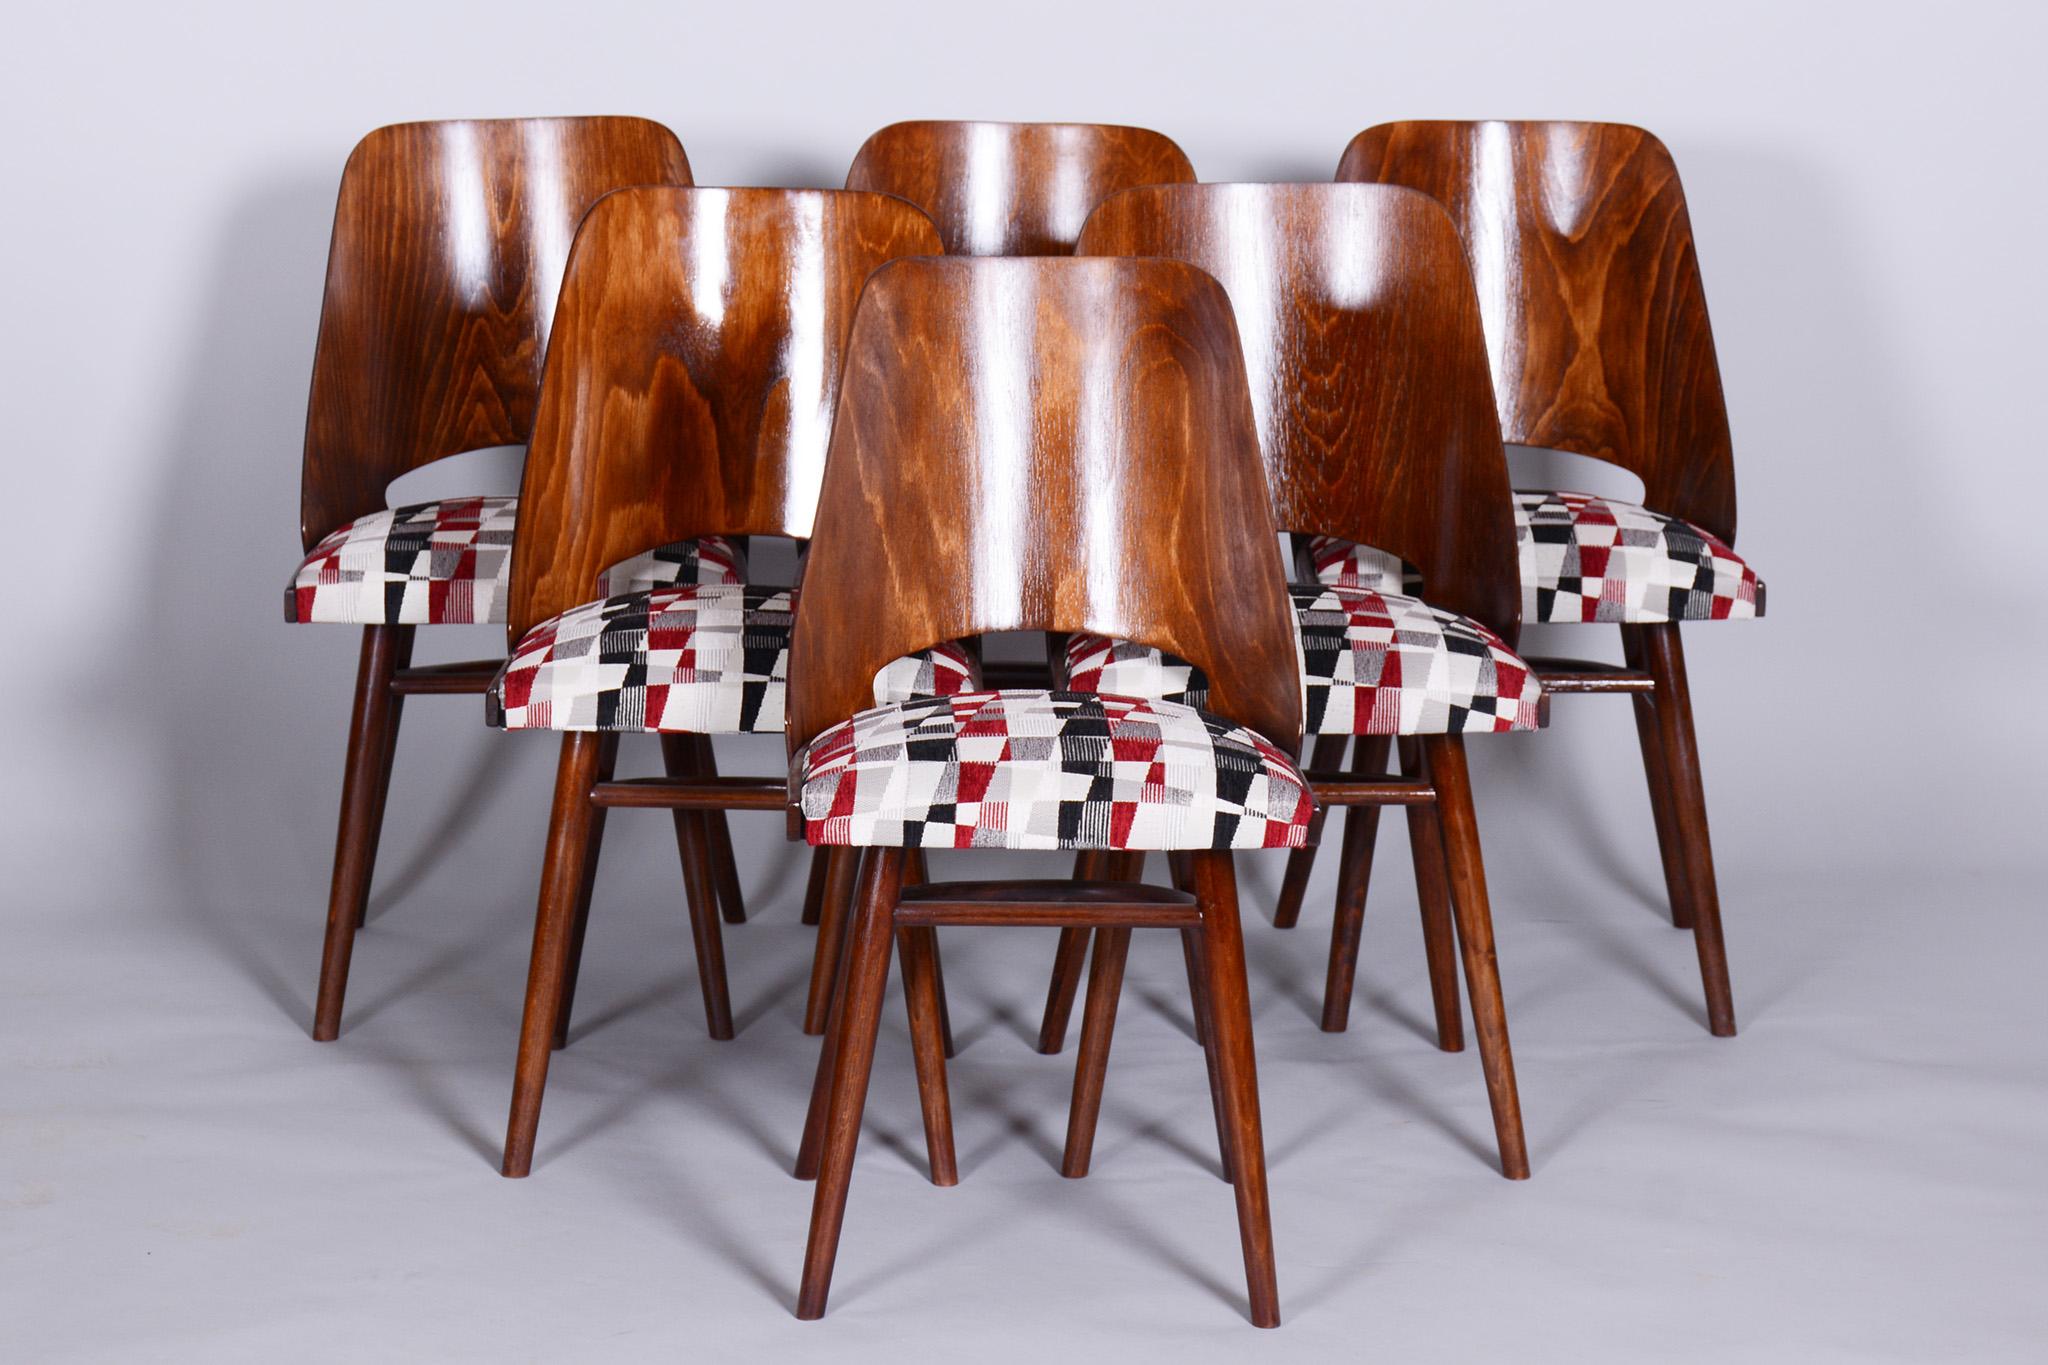 Restored Set of Six Mid-Century Beech Armchairs.

Designer: Oswald Heardtl
Source: Czechia
Period: 1950-1959
Material: Beech, Fabric, Upholstery

Our professional refurbishing team in Czechia has fully restored it according to the original